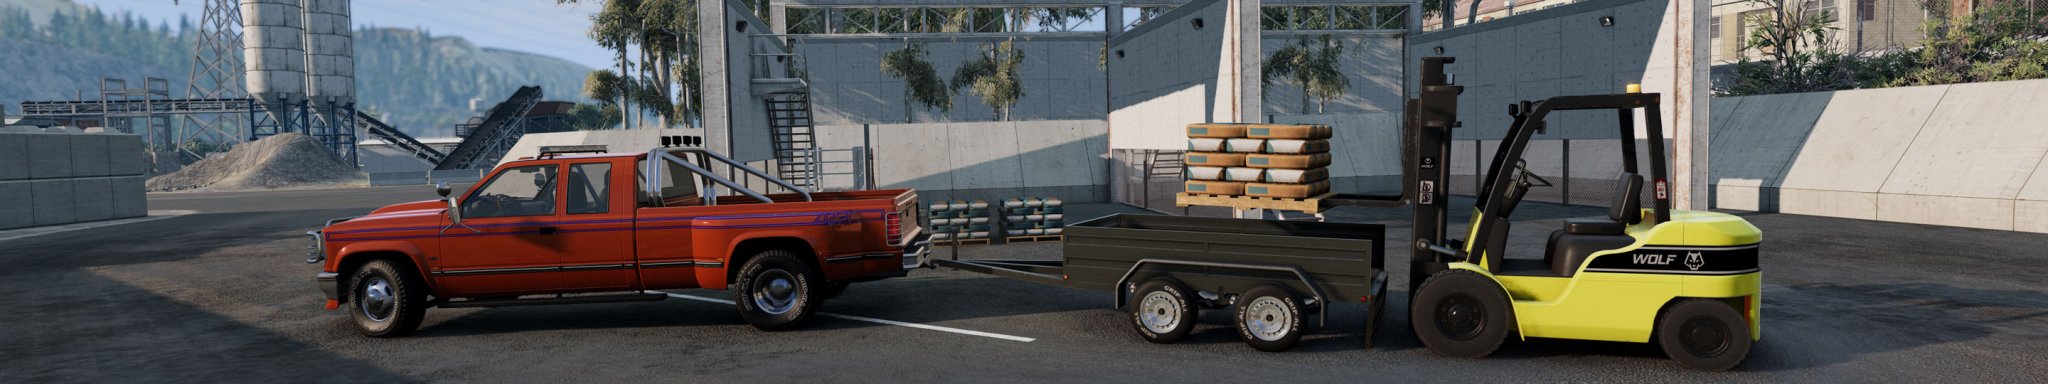 0 BeamNG Gavril D Series DUALLY with TRAILER at SEALBRIK Concrete Plant copy.jpg